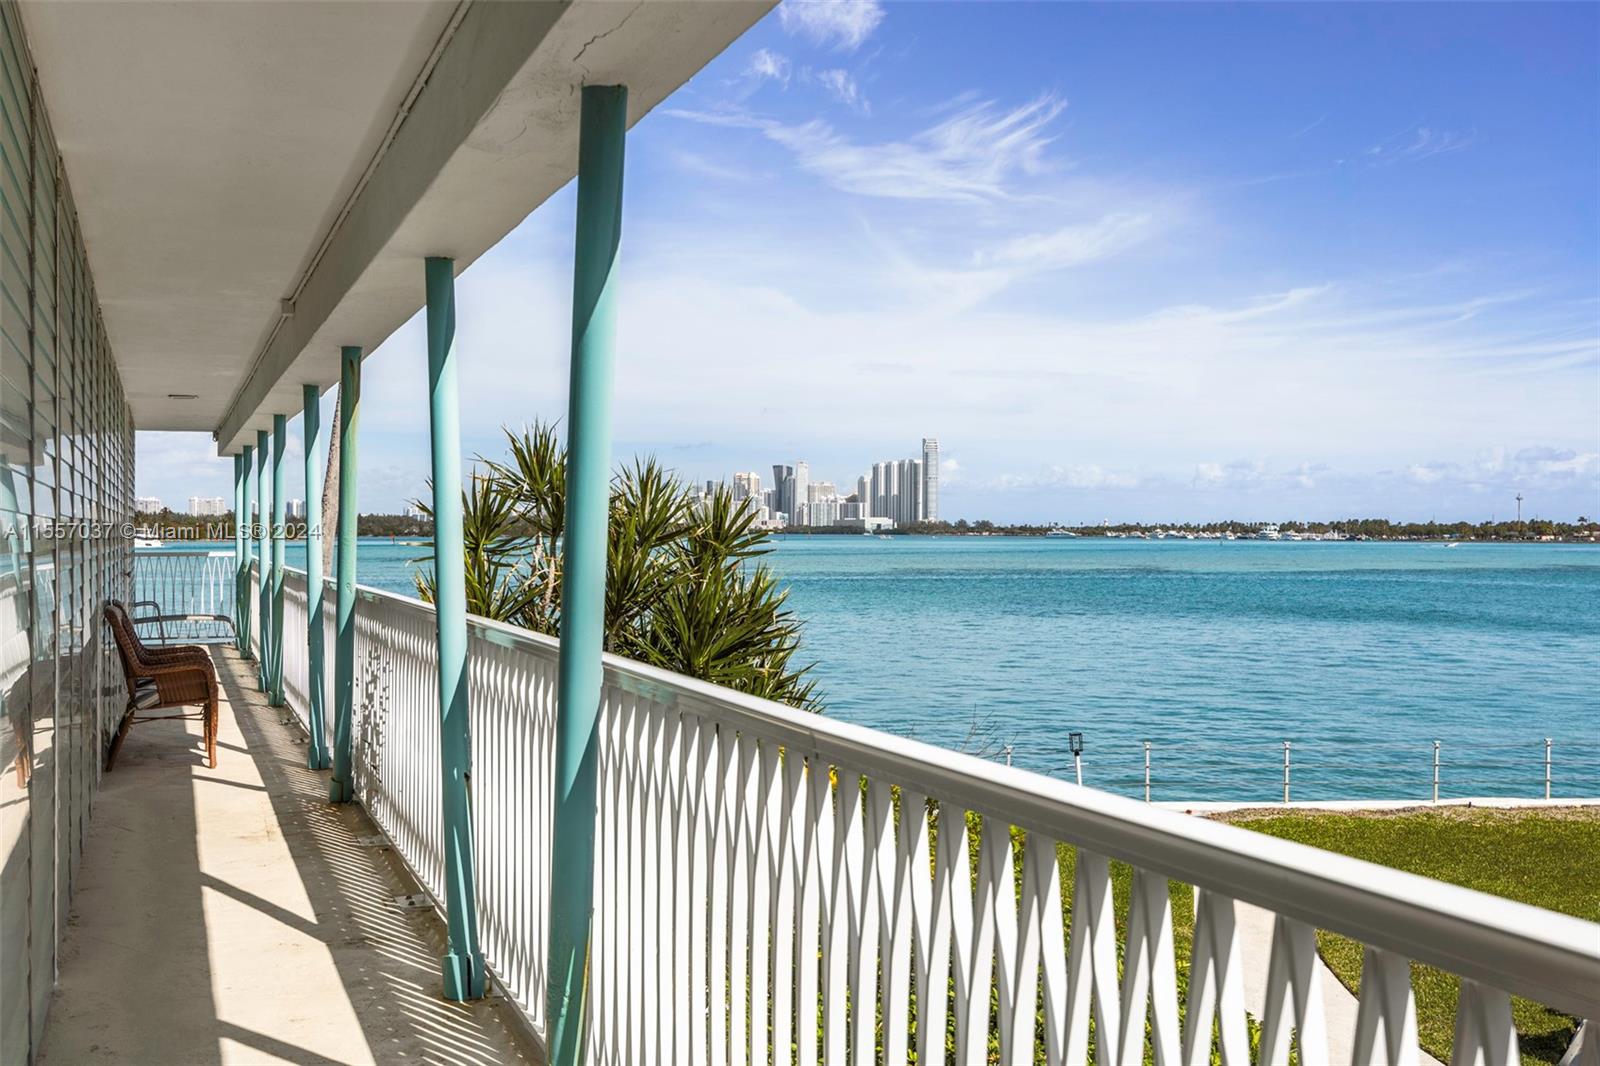 Dreamy mid-century 2-bed, 2-bath co-op condo with spectacular bay frontage on Bay Harbour Island. This lovely second floor unit features 750 SF of living space, gorgeous terrazzo floors throughout , light-filled spaces and views of Biscayne Bay. Enjoy beach-town living in the Magic City! The Bay Harbor Club boasts lush tropical landscaping, swimming pool, shuffleboard, BBQ area + more. Reserved parking and within walking distance of Miami's coolest shops and restaurants. No rentals. No pets. Cash only. CO-OP DUES ARE PAID SEMI-ANNUALLY. **See broker remarks.